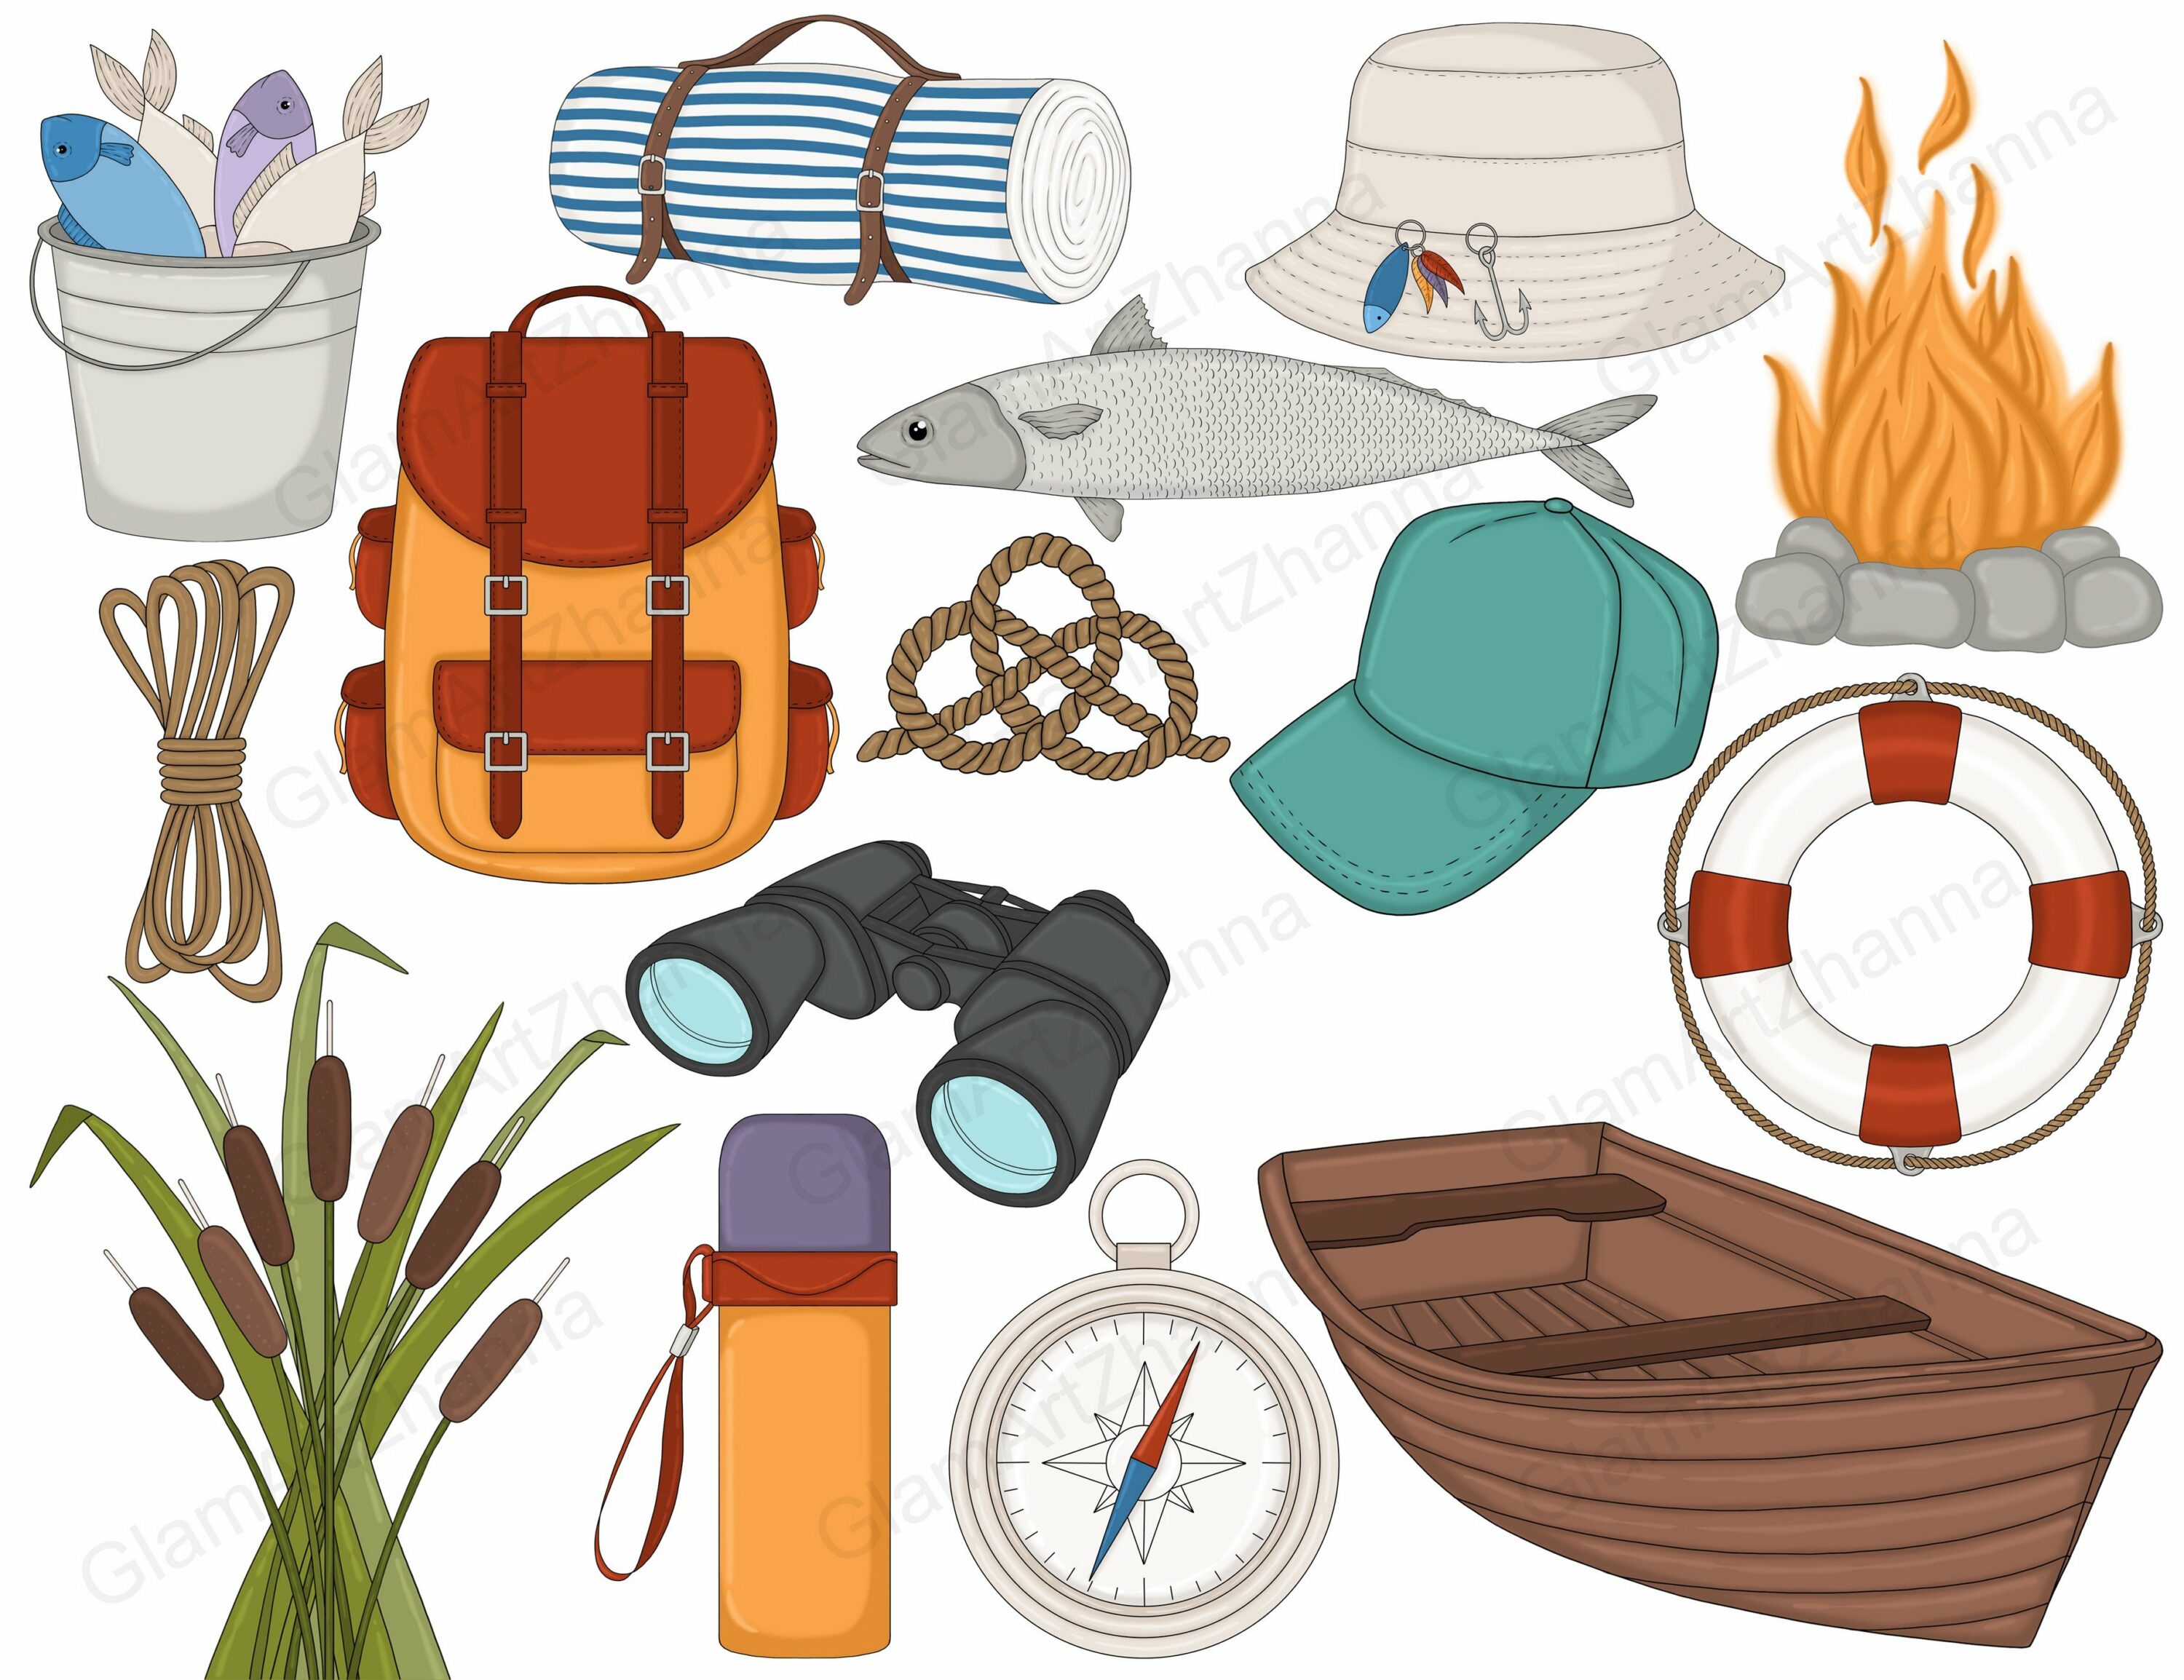 Colorful camping elements.